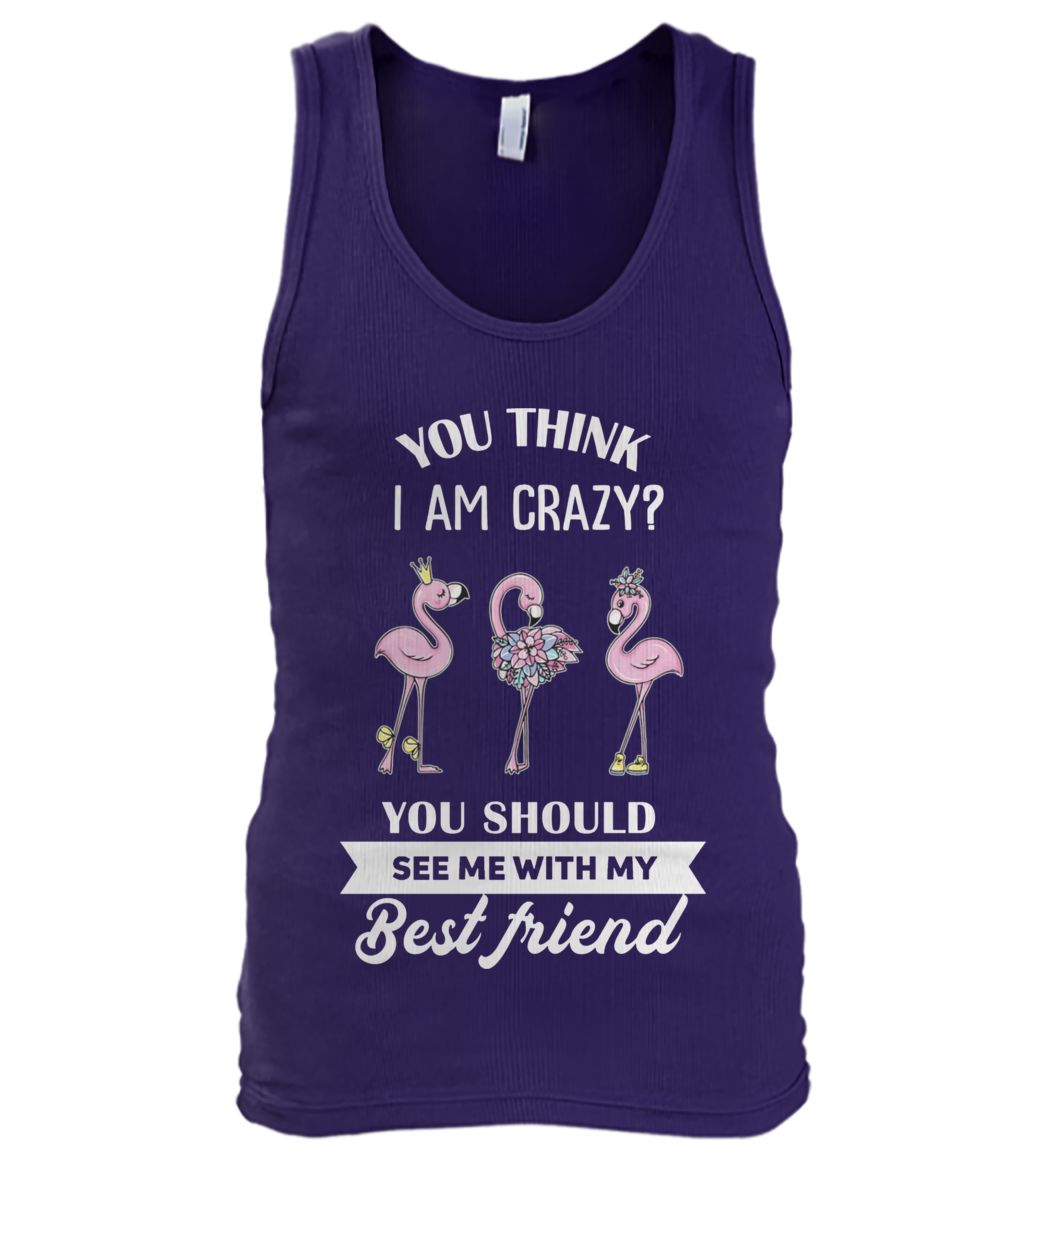 Flamingo you think I am crazy you should see me with my best friend men's tank top